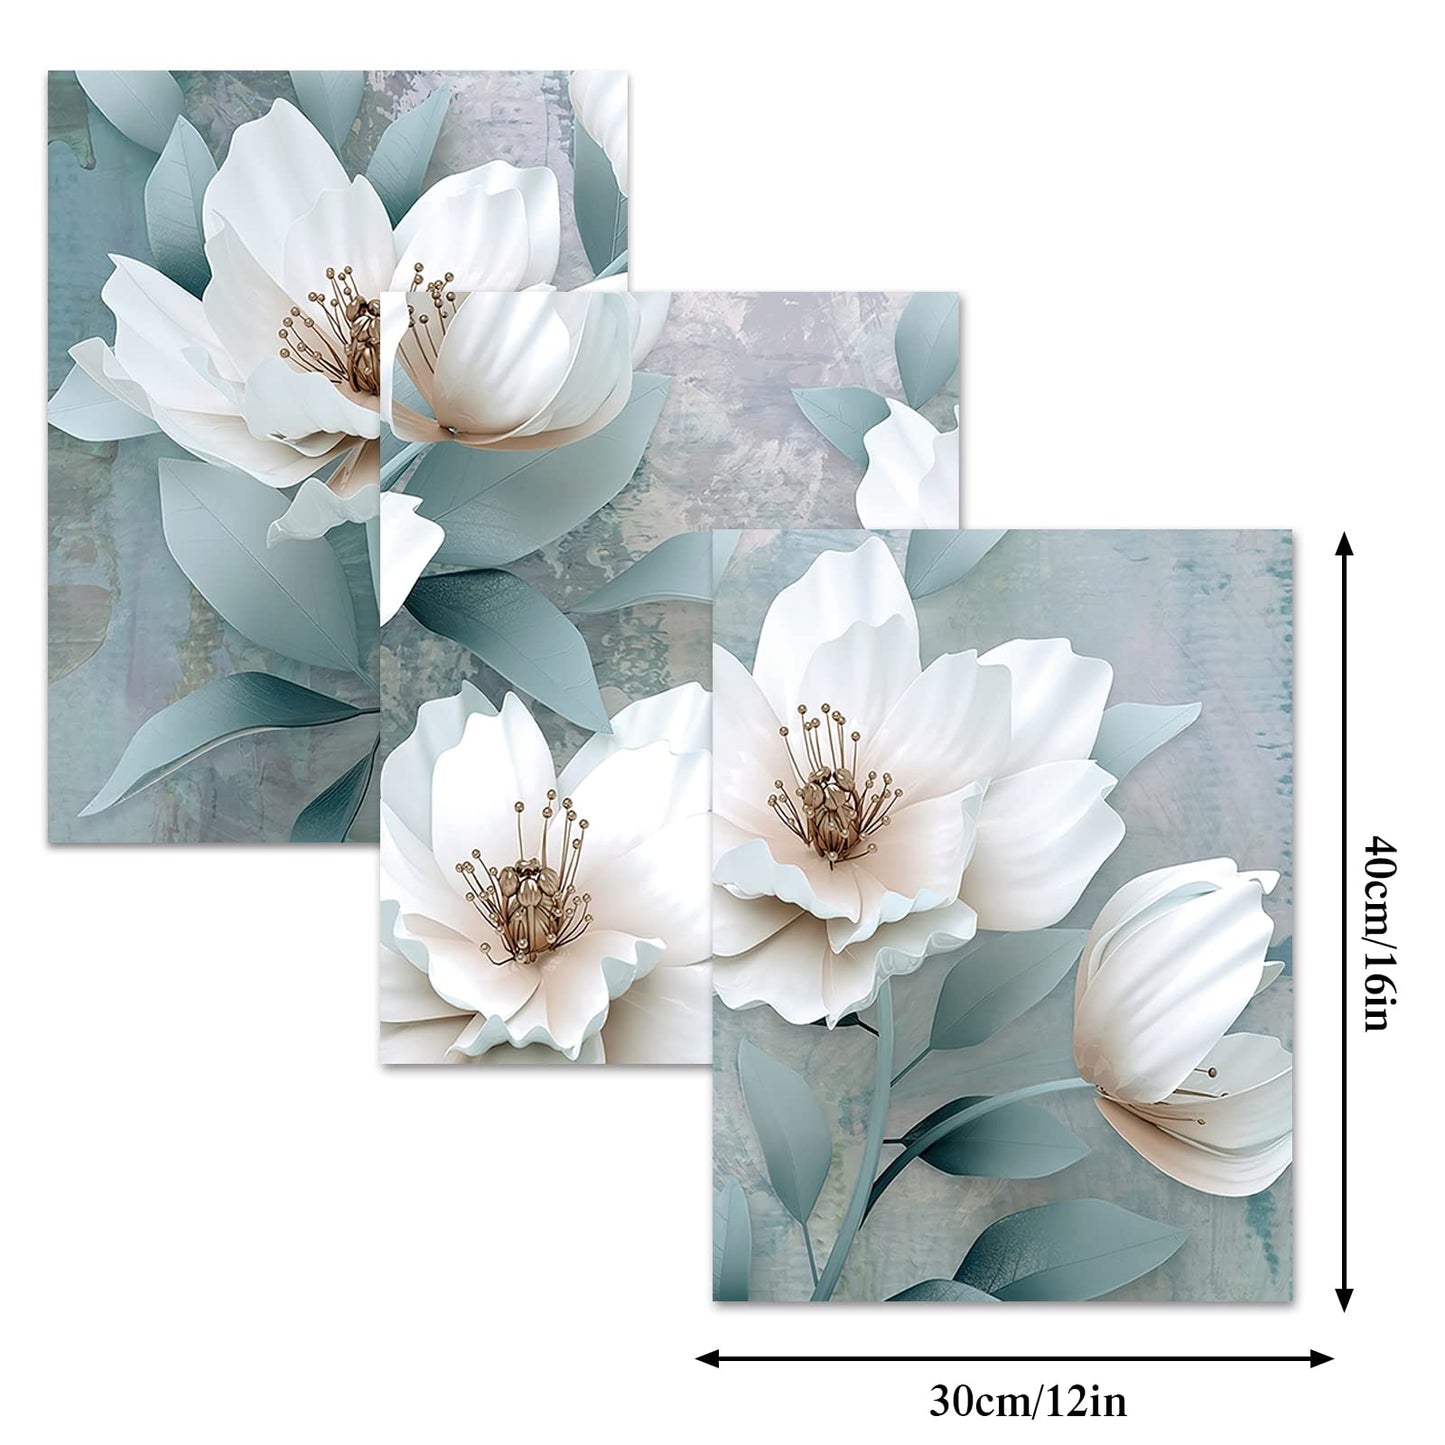 Floral Wall Art Botanical Prints & Posters Floral Canvas Wall Prints Flower Pictures Wall Decor for Living Room, Bathroom Bedroom Kitchen Bathroom Wall Decor, Unframed Set of 3, 12x16 inches